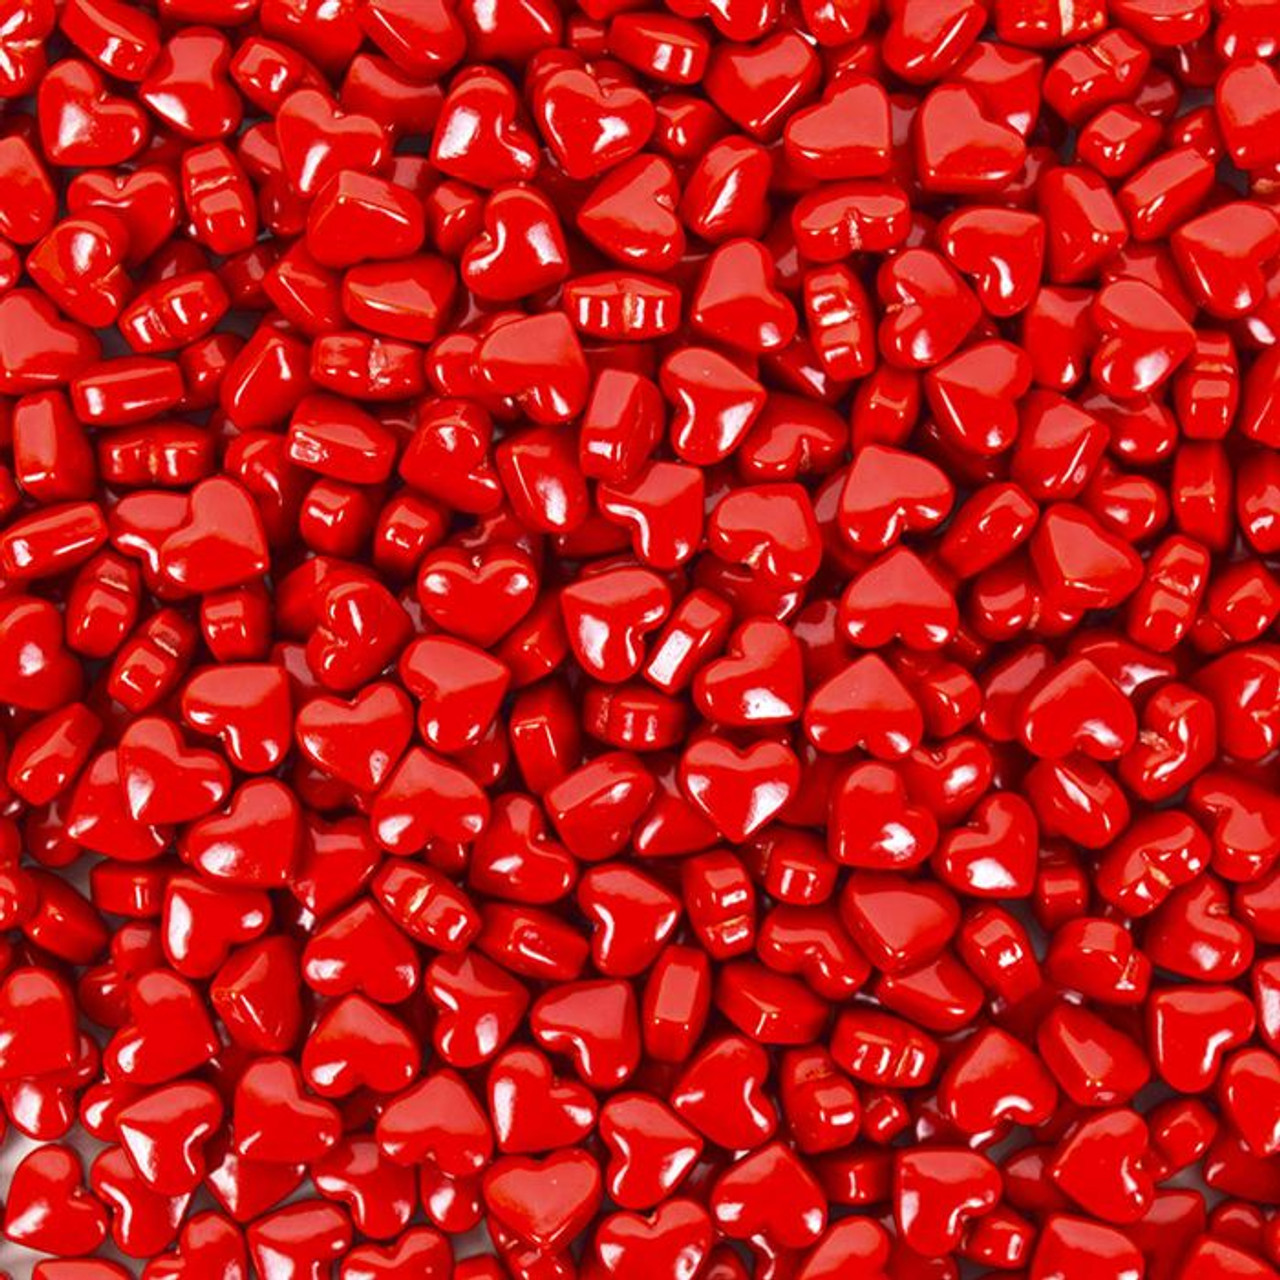 RED CINNAMON CANDY HEARTS from Miami Candies Sweets & Snacks